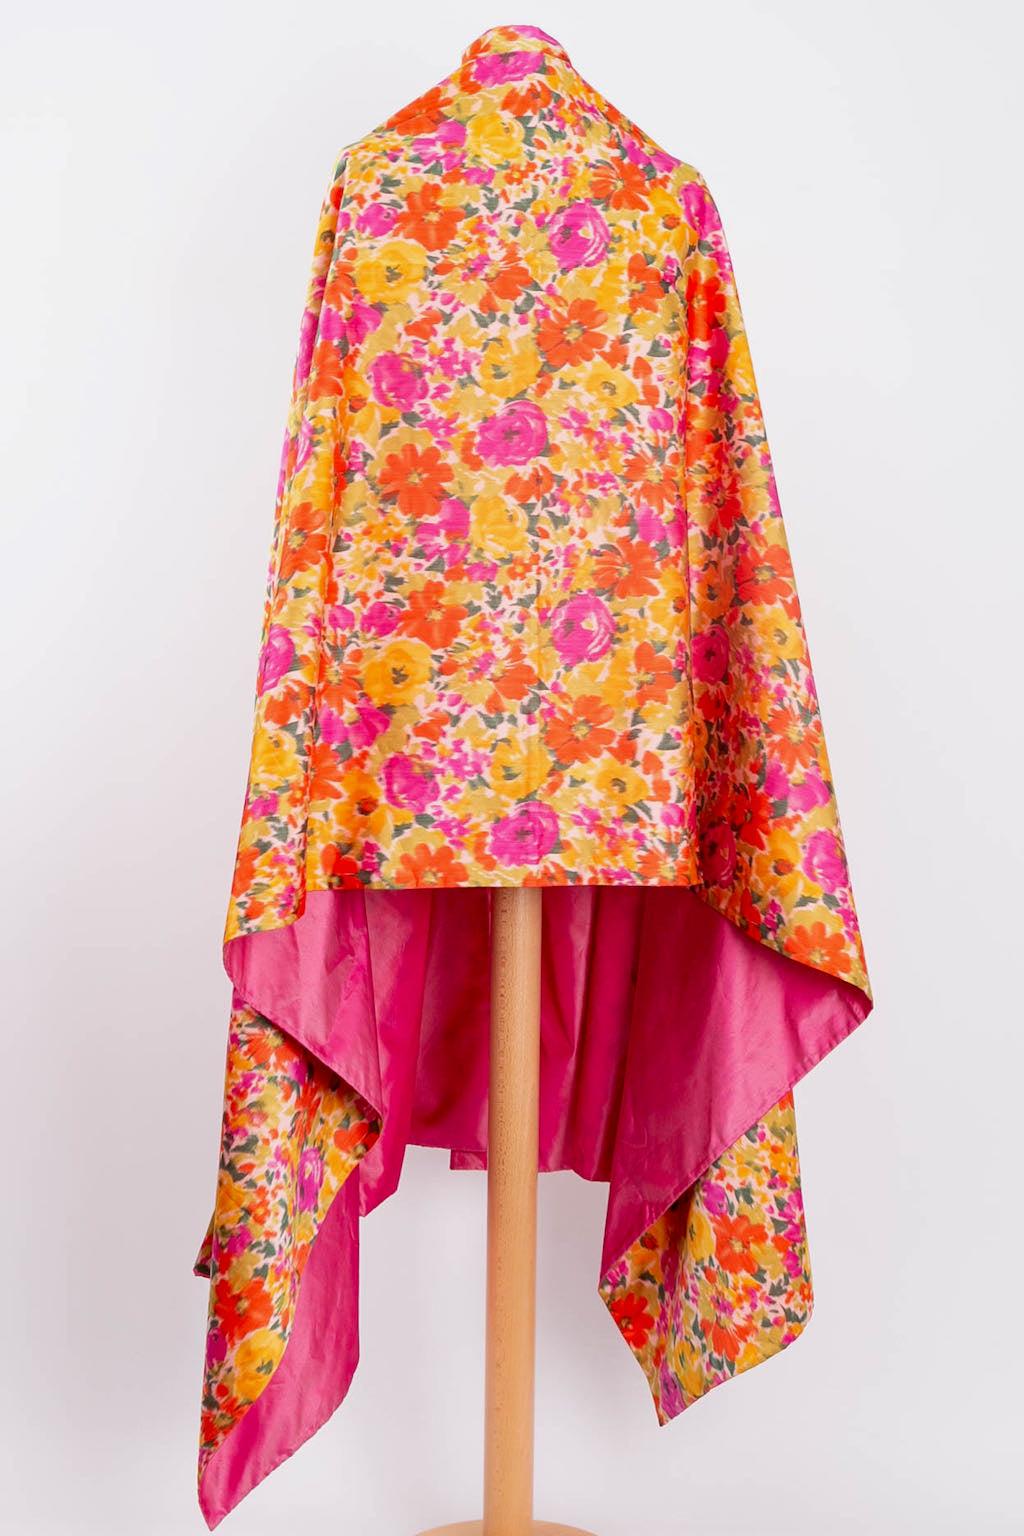 Nina Ricci Flower Silk Dress and its Stole For Sale 12